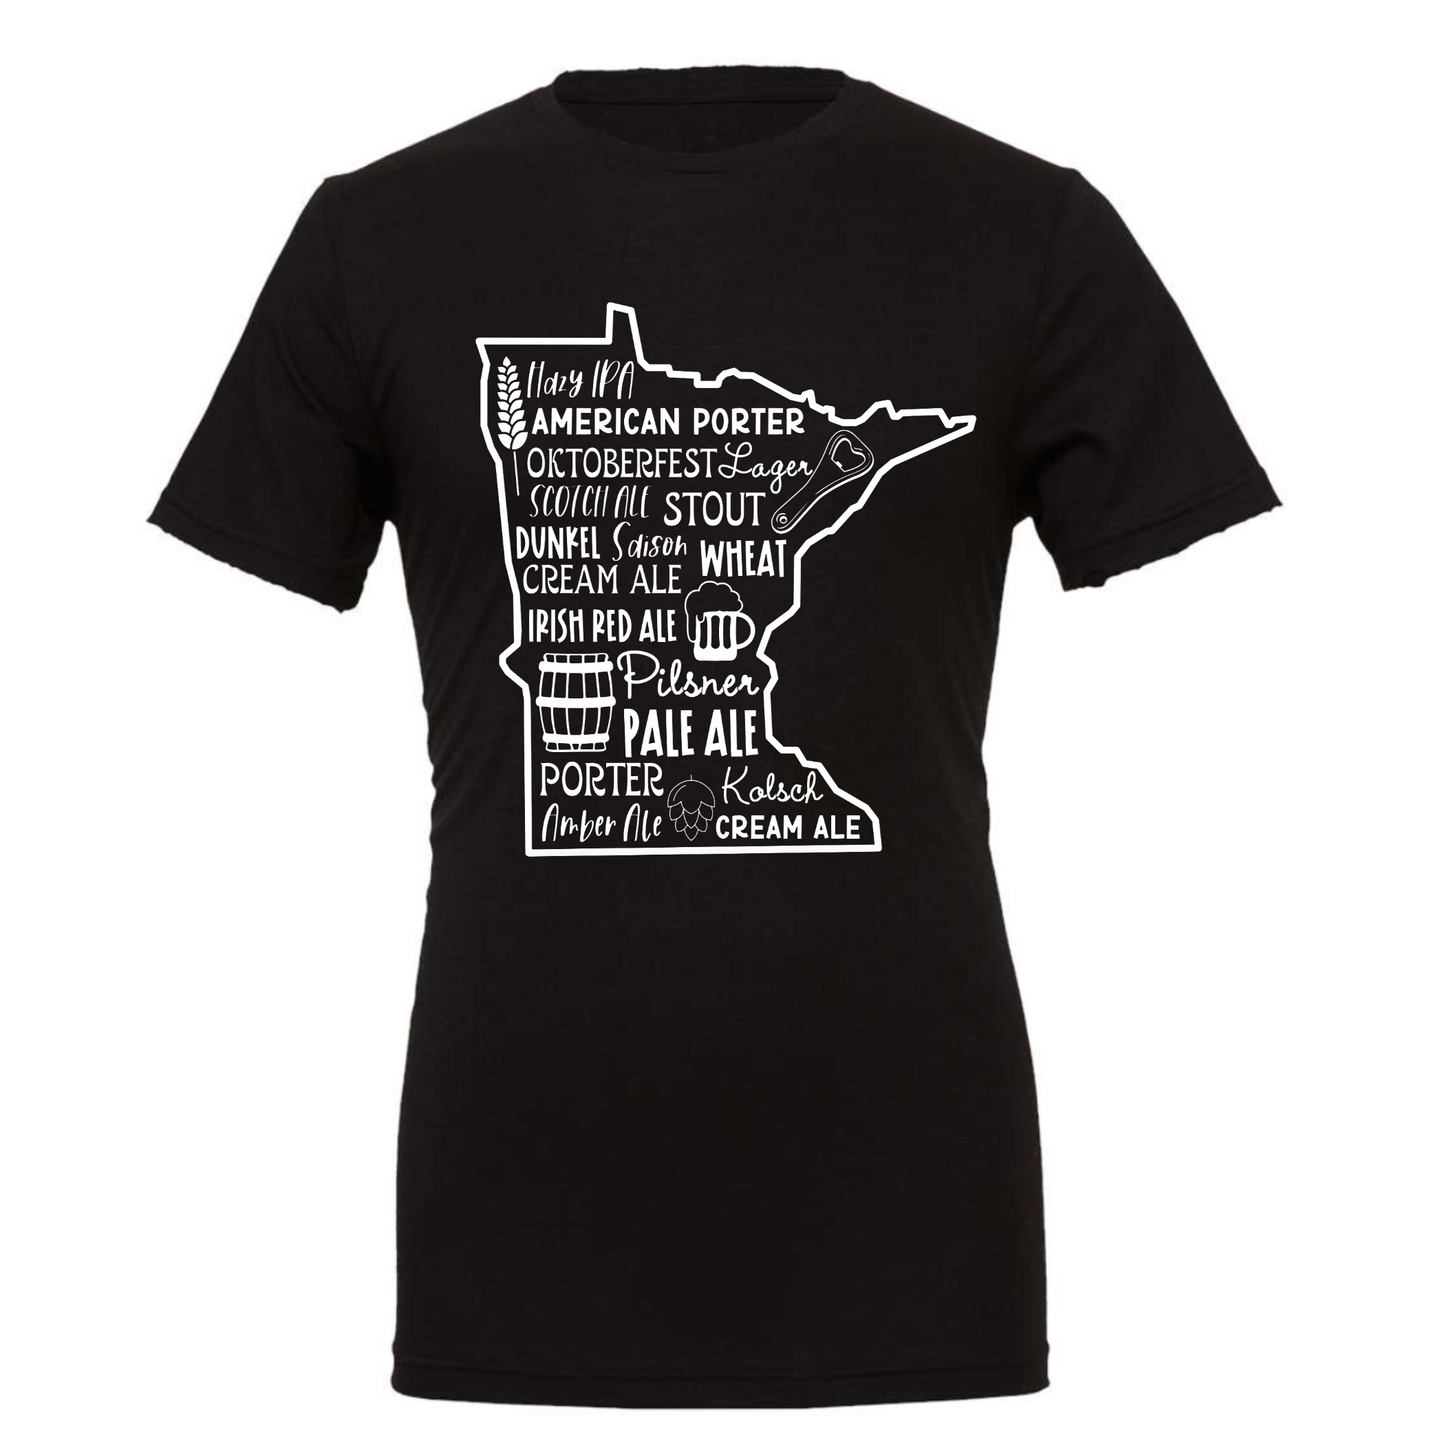 Minnesota Beers - T-Shirt with hazy ipa, American porter, Oktoberfest, lager, scotch ale, stout, dunkel, saison, wheat, cream ale, Irish red ale, pilsner, pale ale, porter, kolsch, amber ale, cream ale on the front in the state of Minnesota with icons of a hop, glass of beer, barrel of beer, bottle opener, and a wheat strand